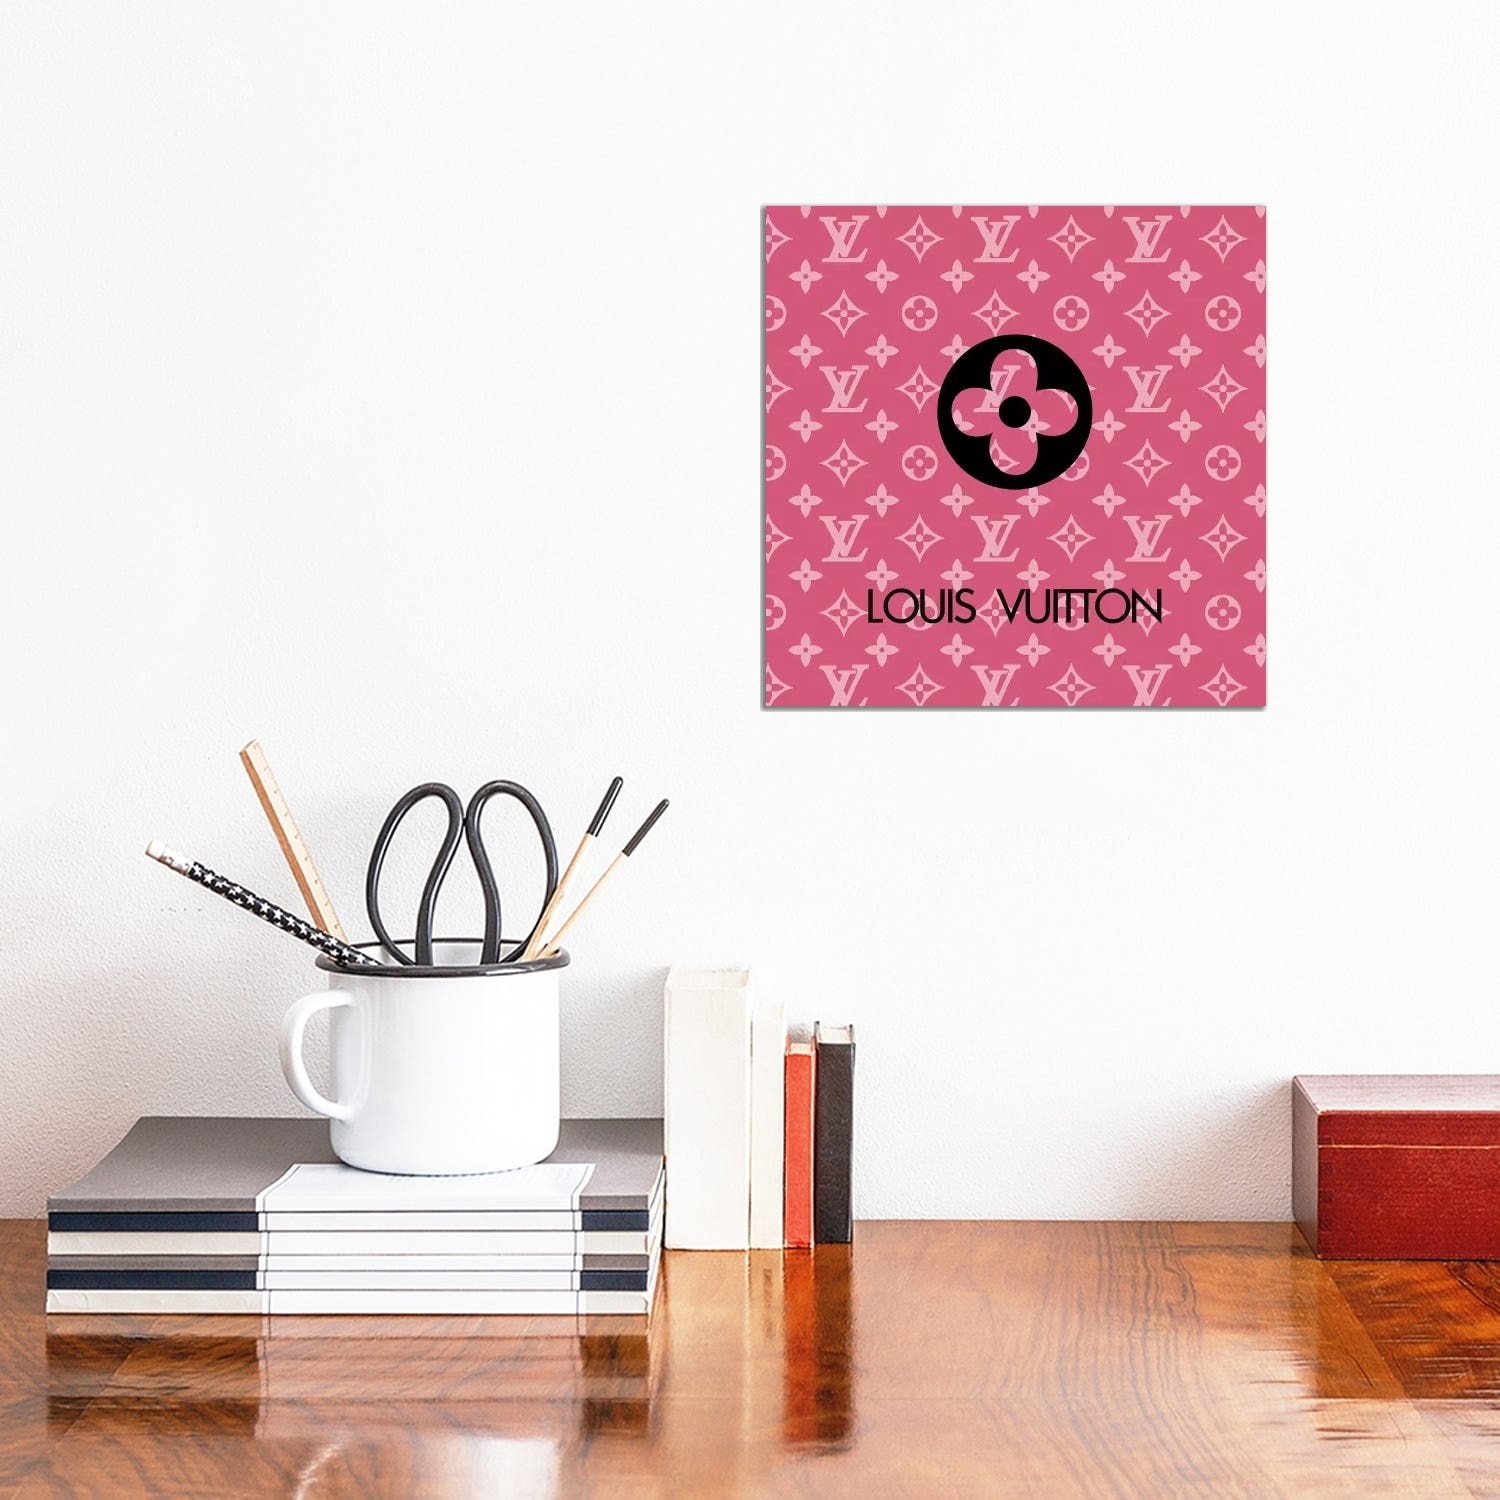 iCanvas LOUIS VUITTON Pink by Art Mirano Canvas Print - On Sale